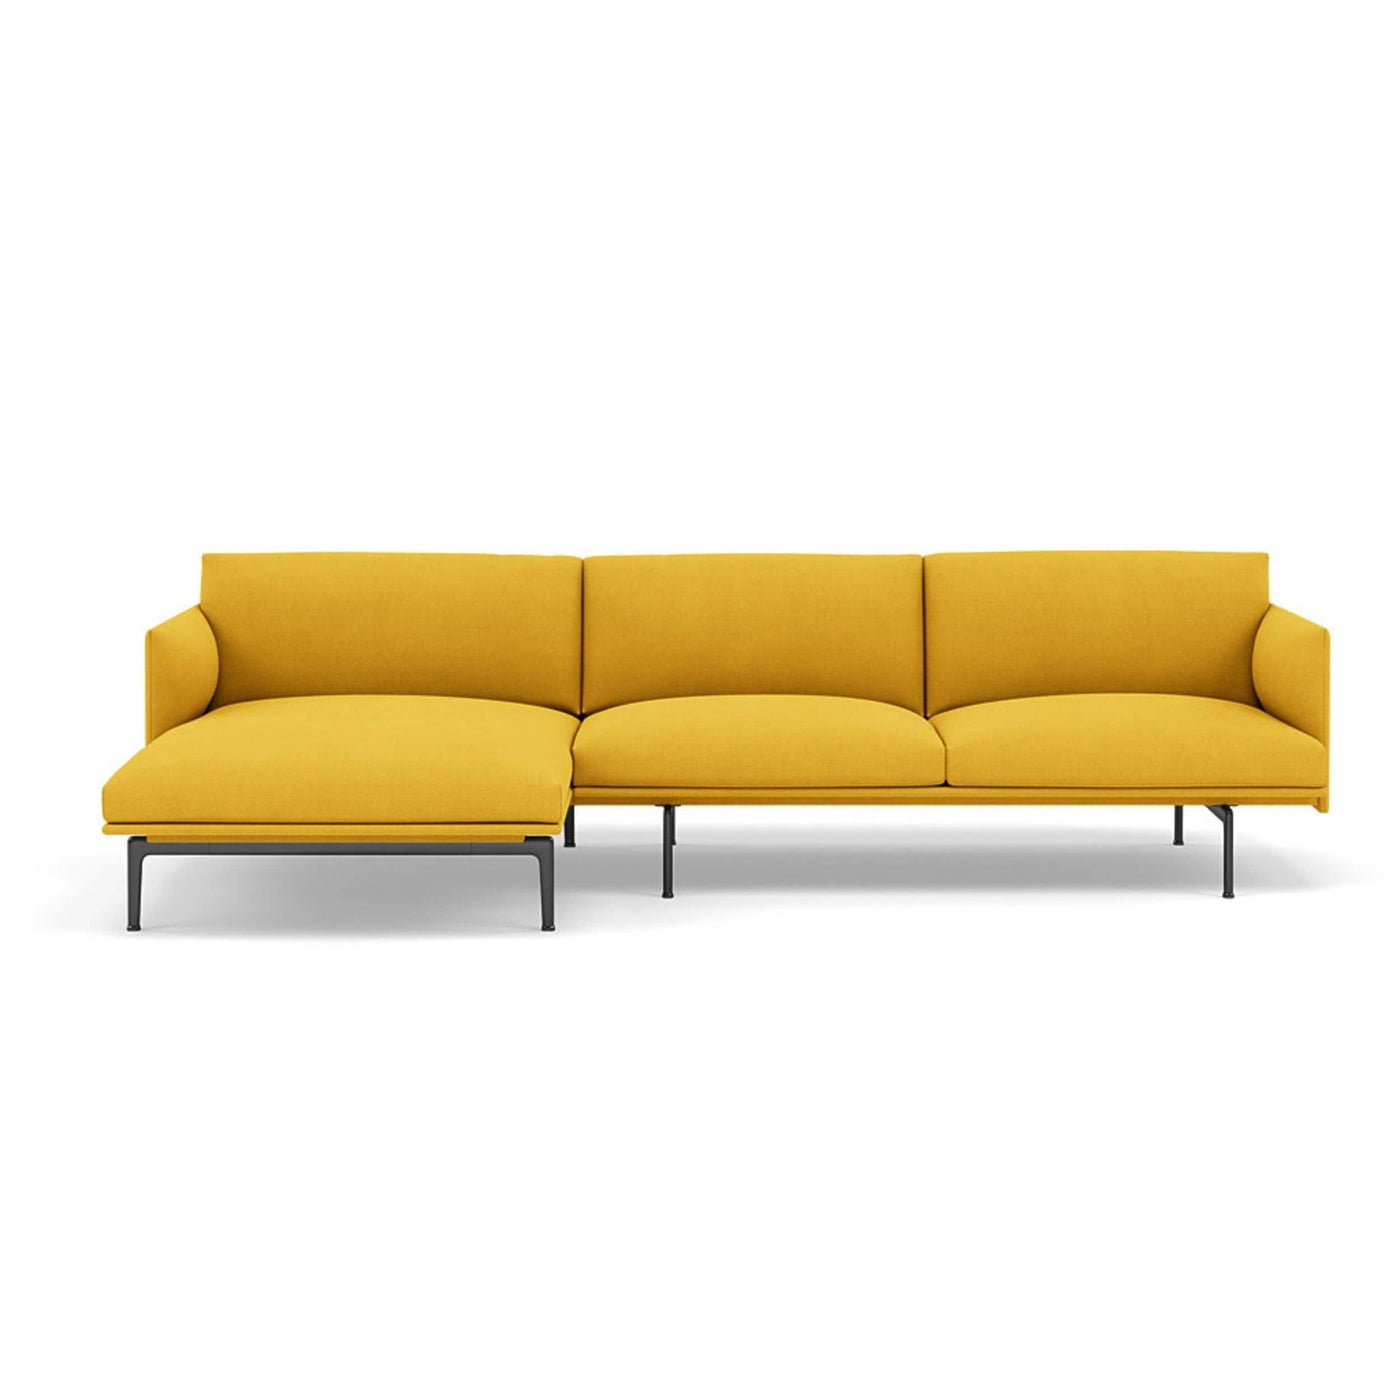 Muuto Outline Chaise Longue sofa in hallingdal 457. Made to order from someday designs. #colour_hallingdal-457